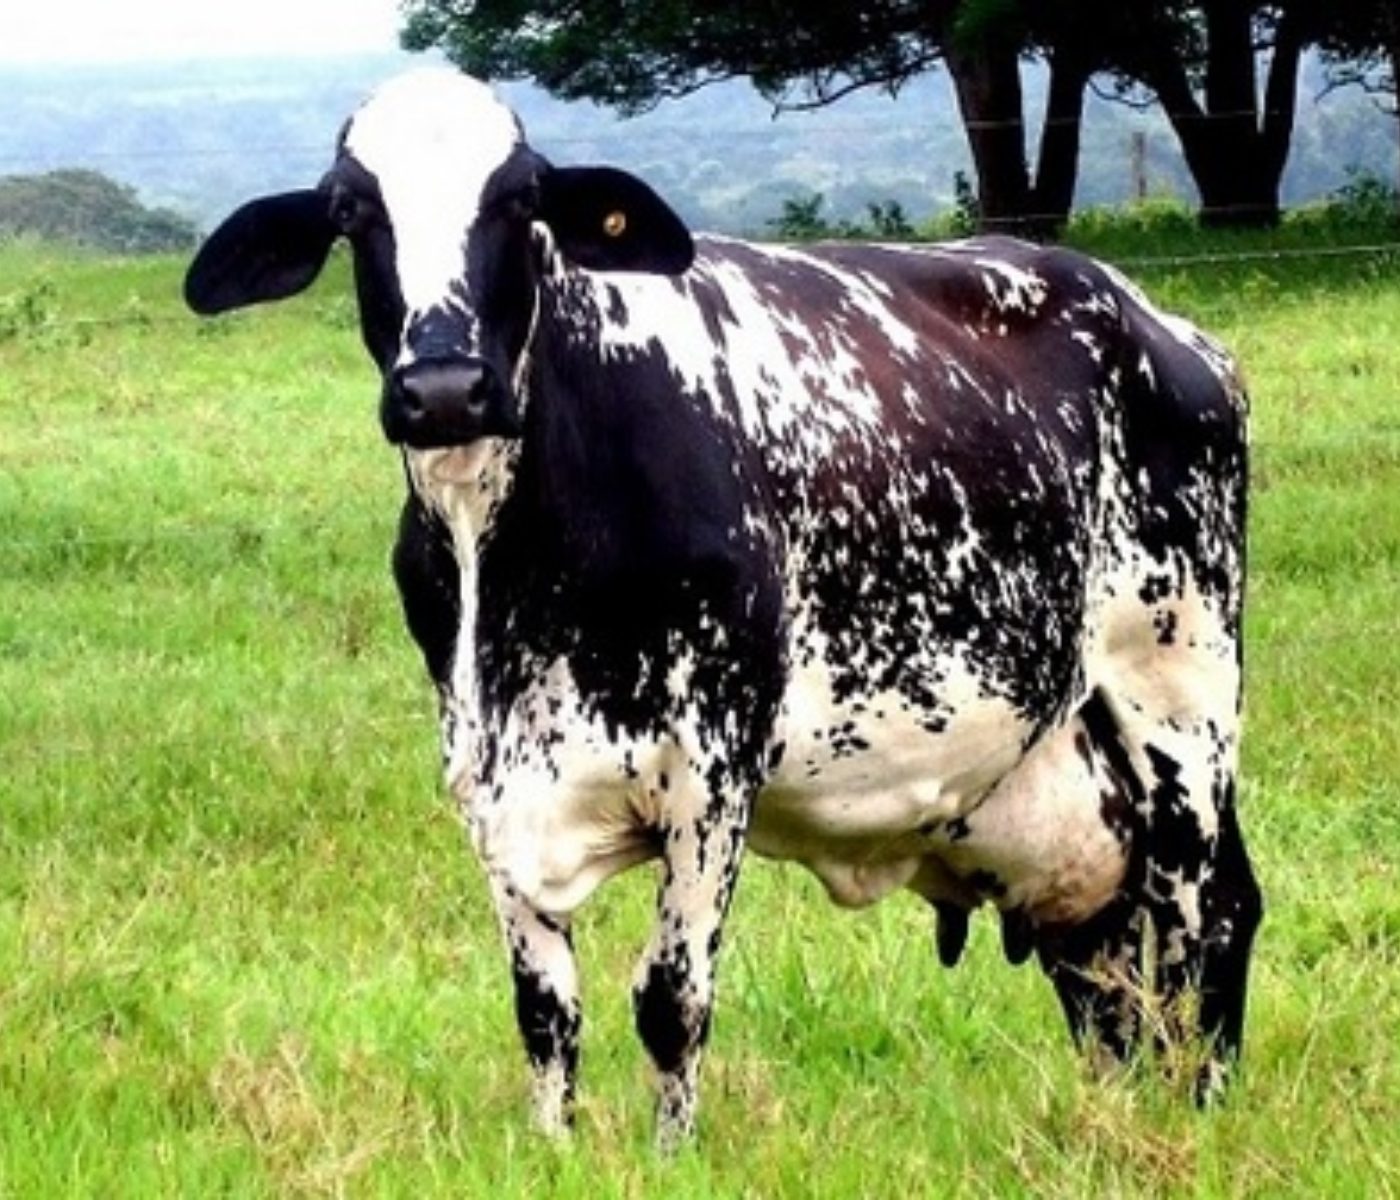 Energy requirements of gestating dairy cows